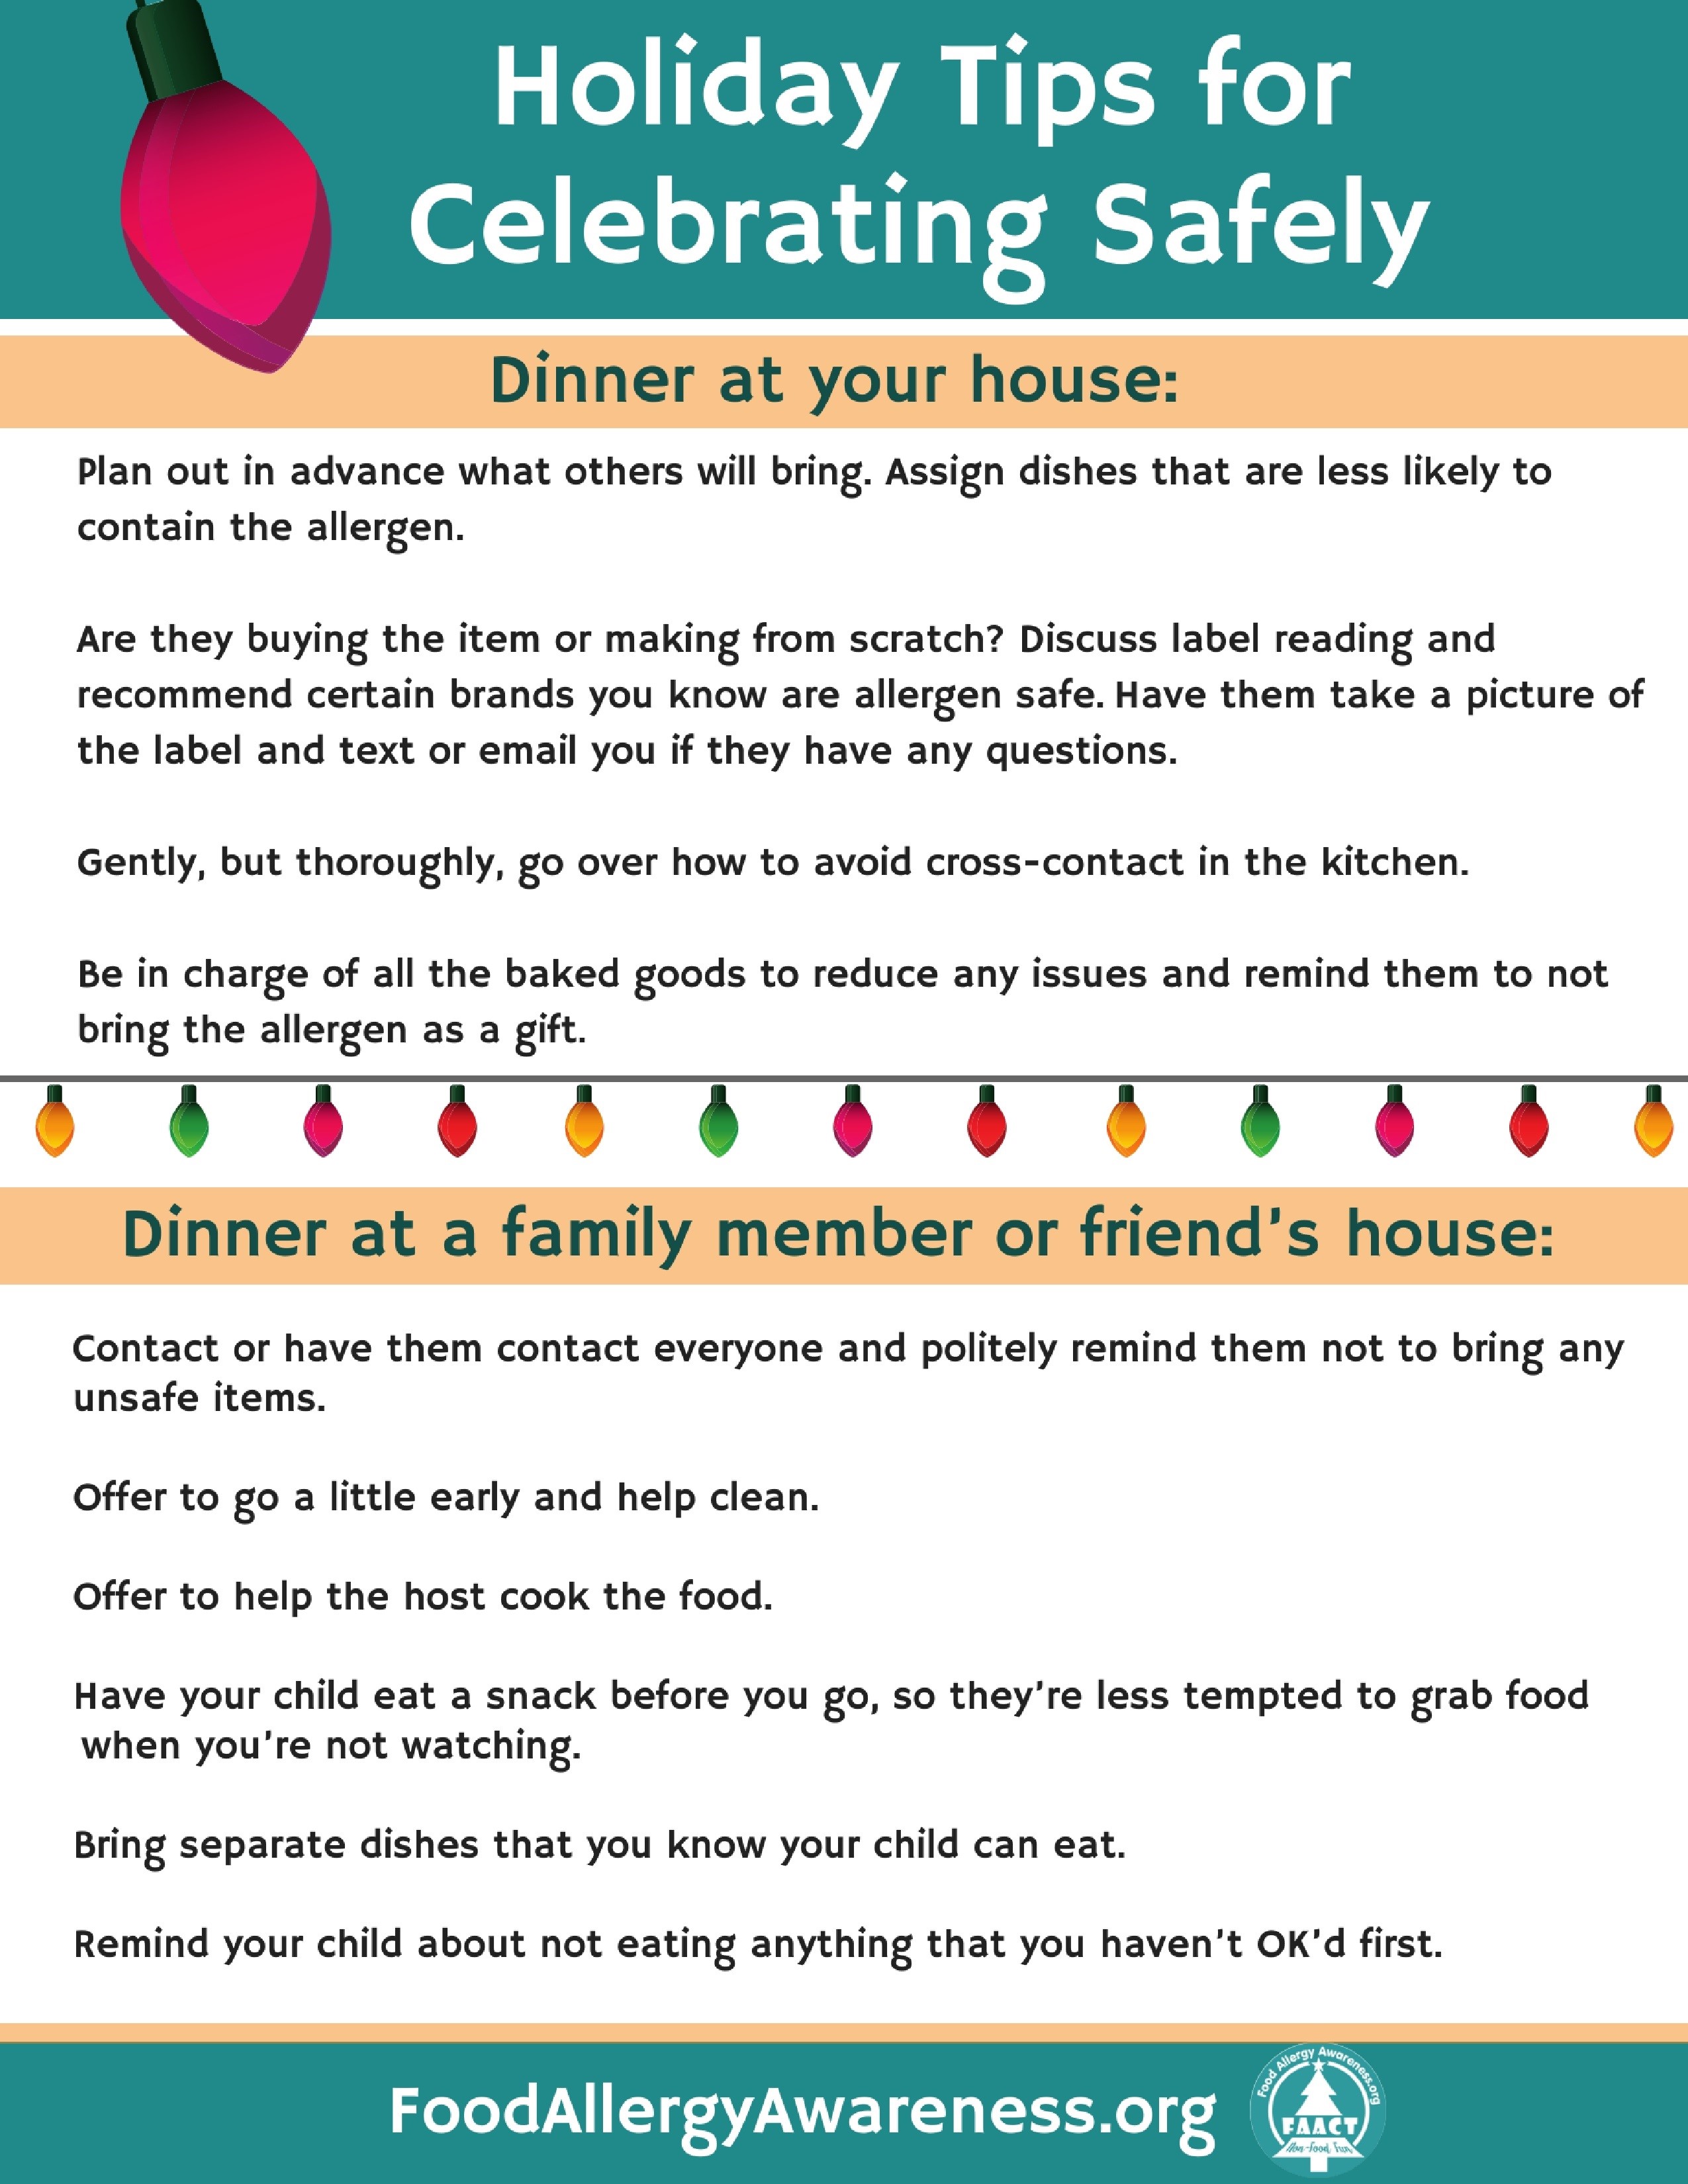 Tips to Minimize Dish Cleaning During the Holidays